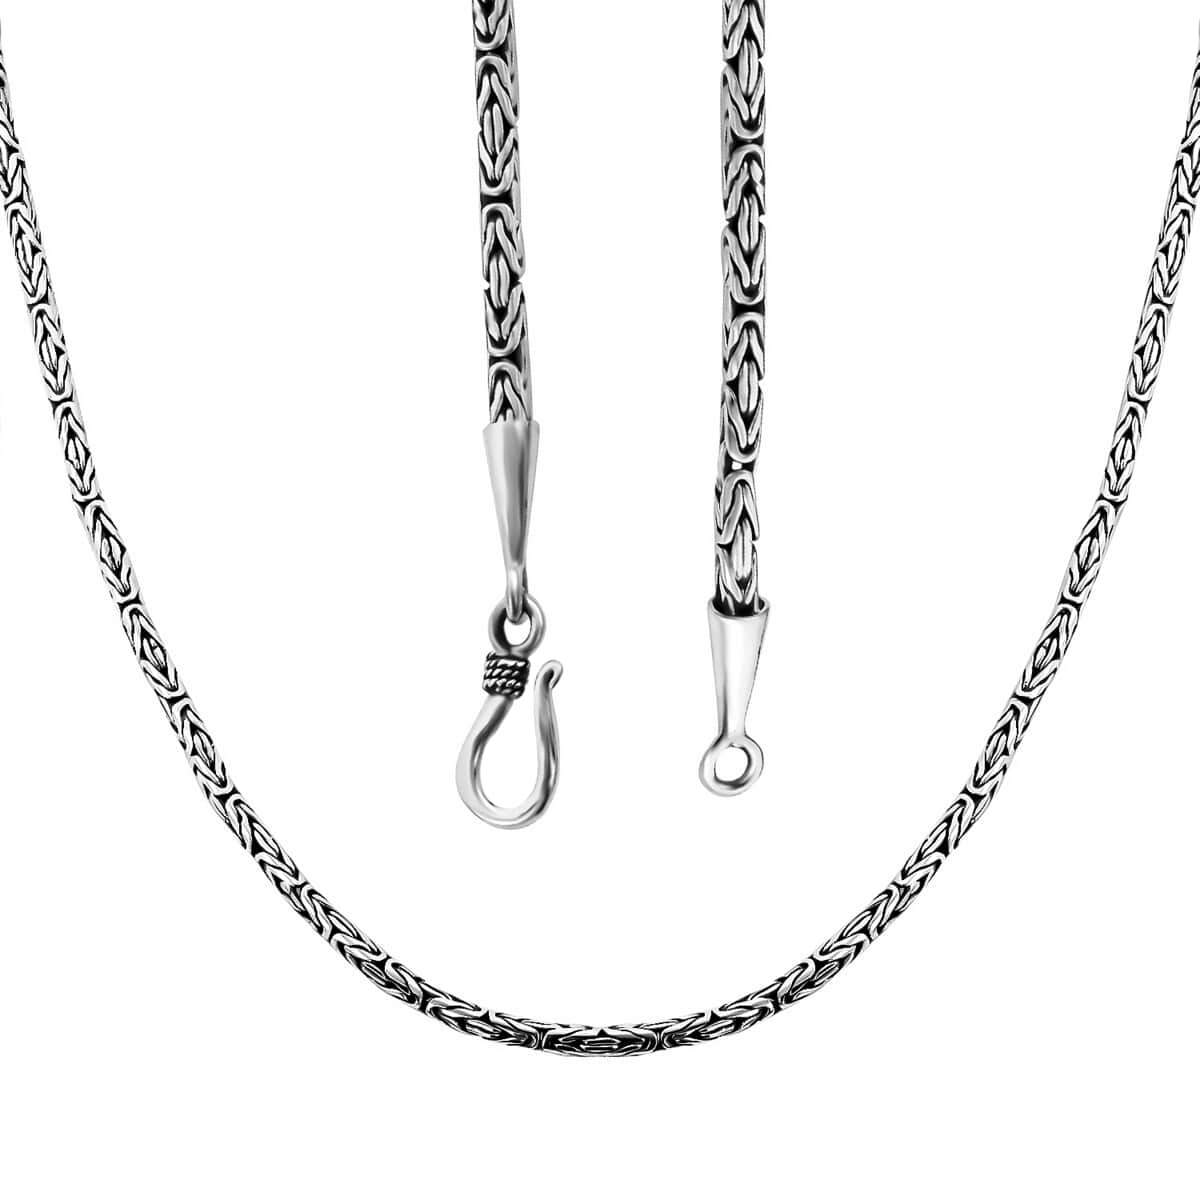 Bali Legacy Sterling Silver Borobudur Chain Necklace, Sterling Silver Necklace, Silver Jewelry, 22 Inch Chain Necklace 2.5mm 22.40 Grams image number 5